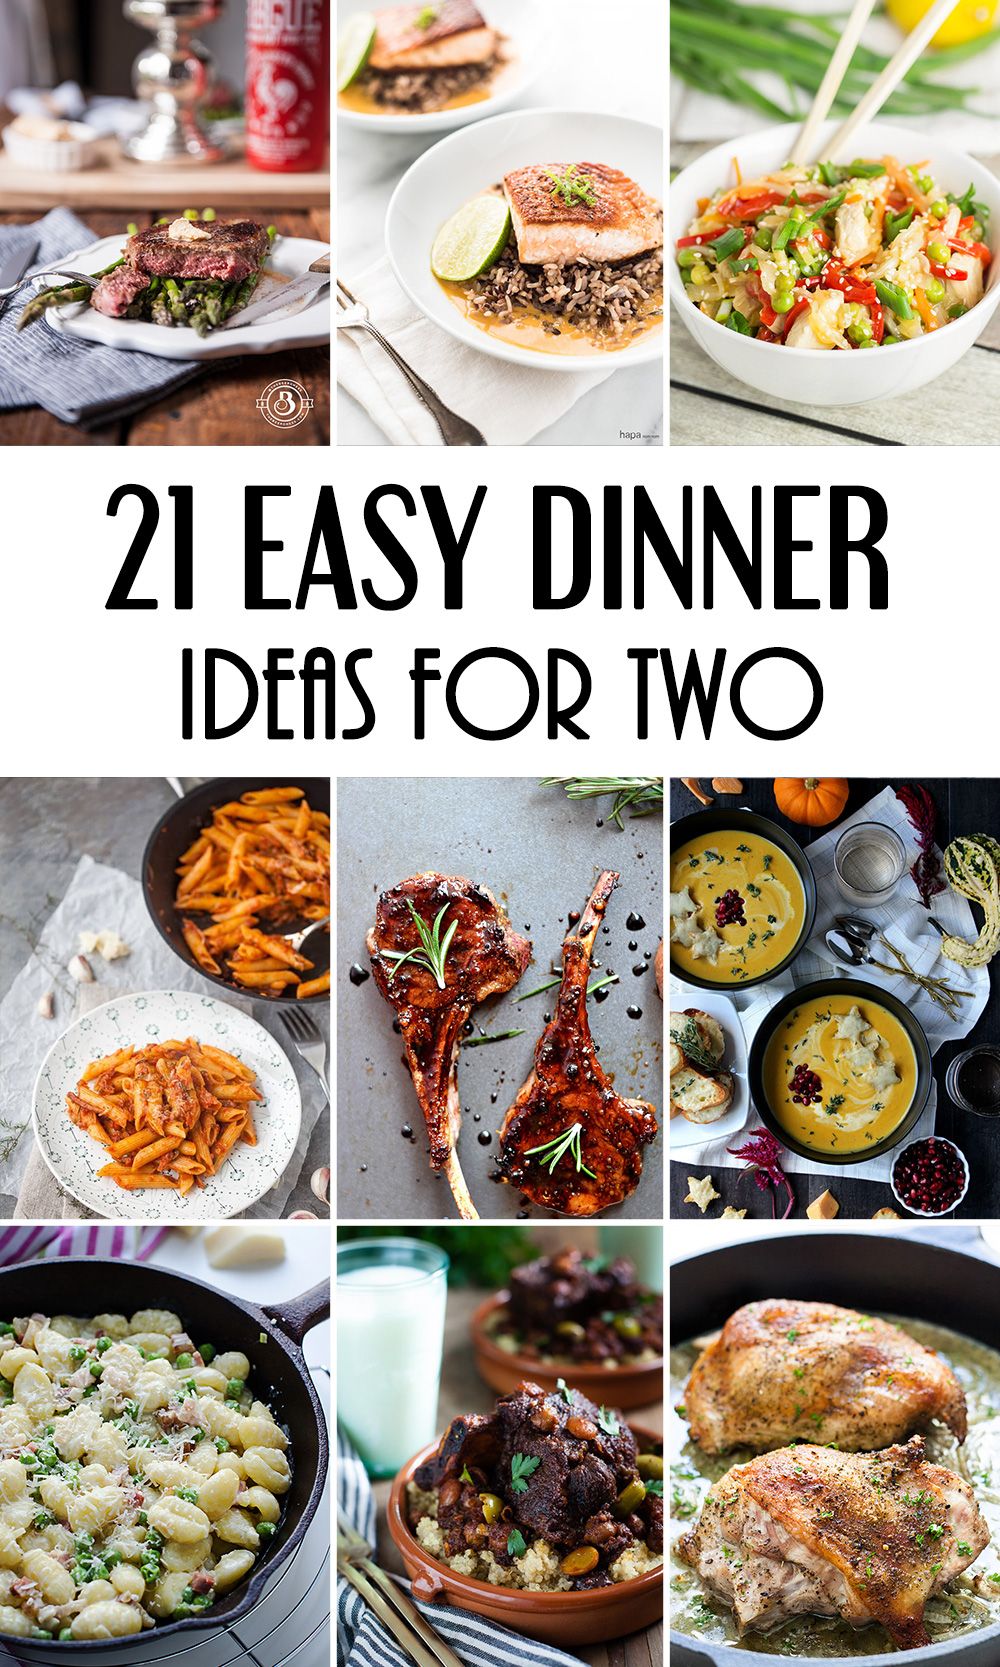 Easy Healthy Dinner Ideas For Two